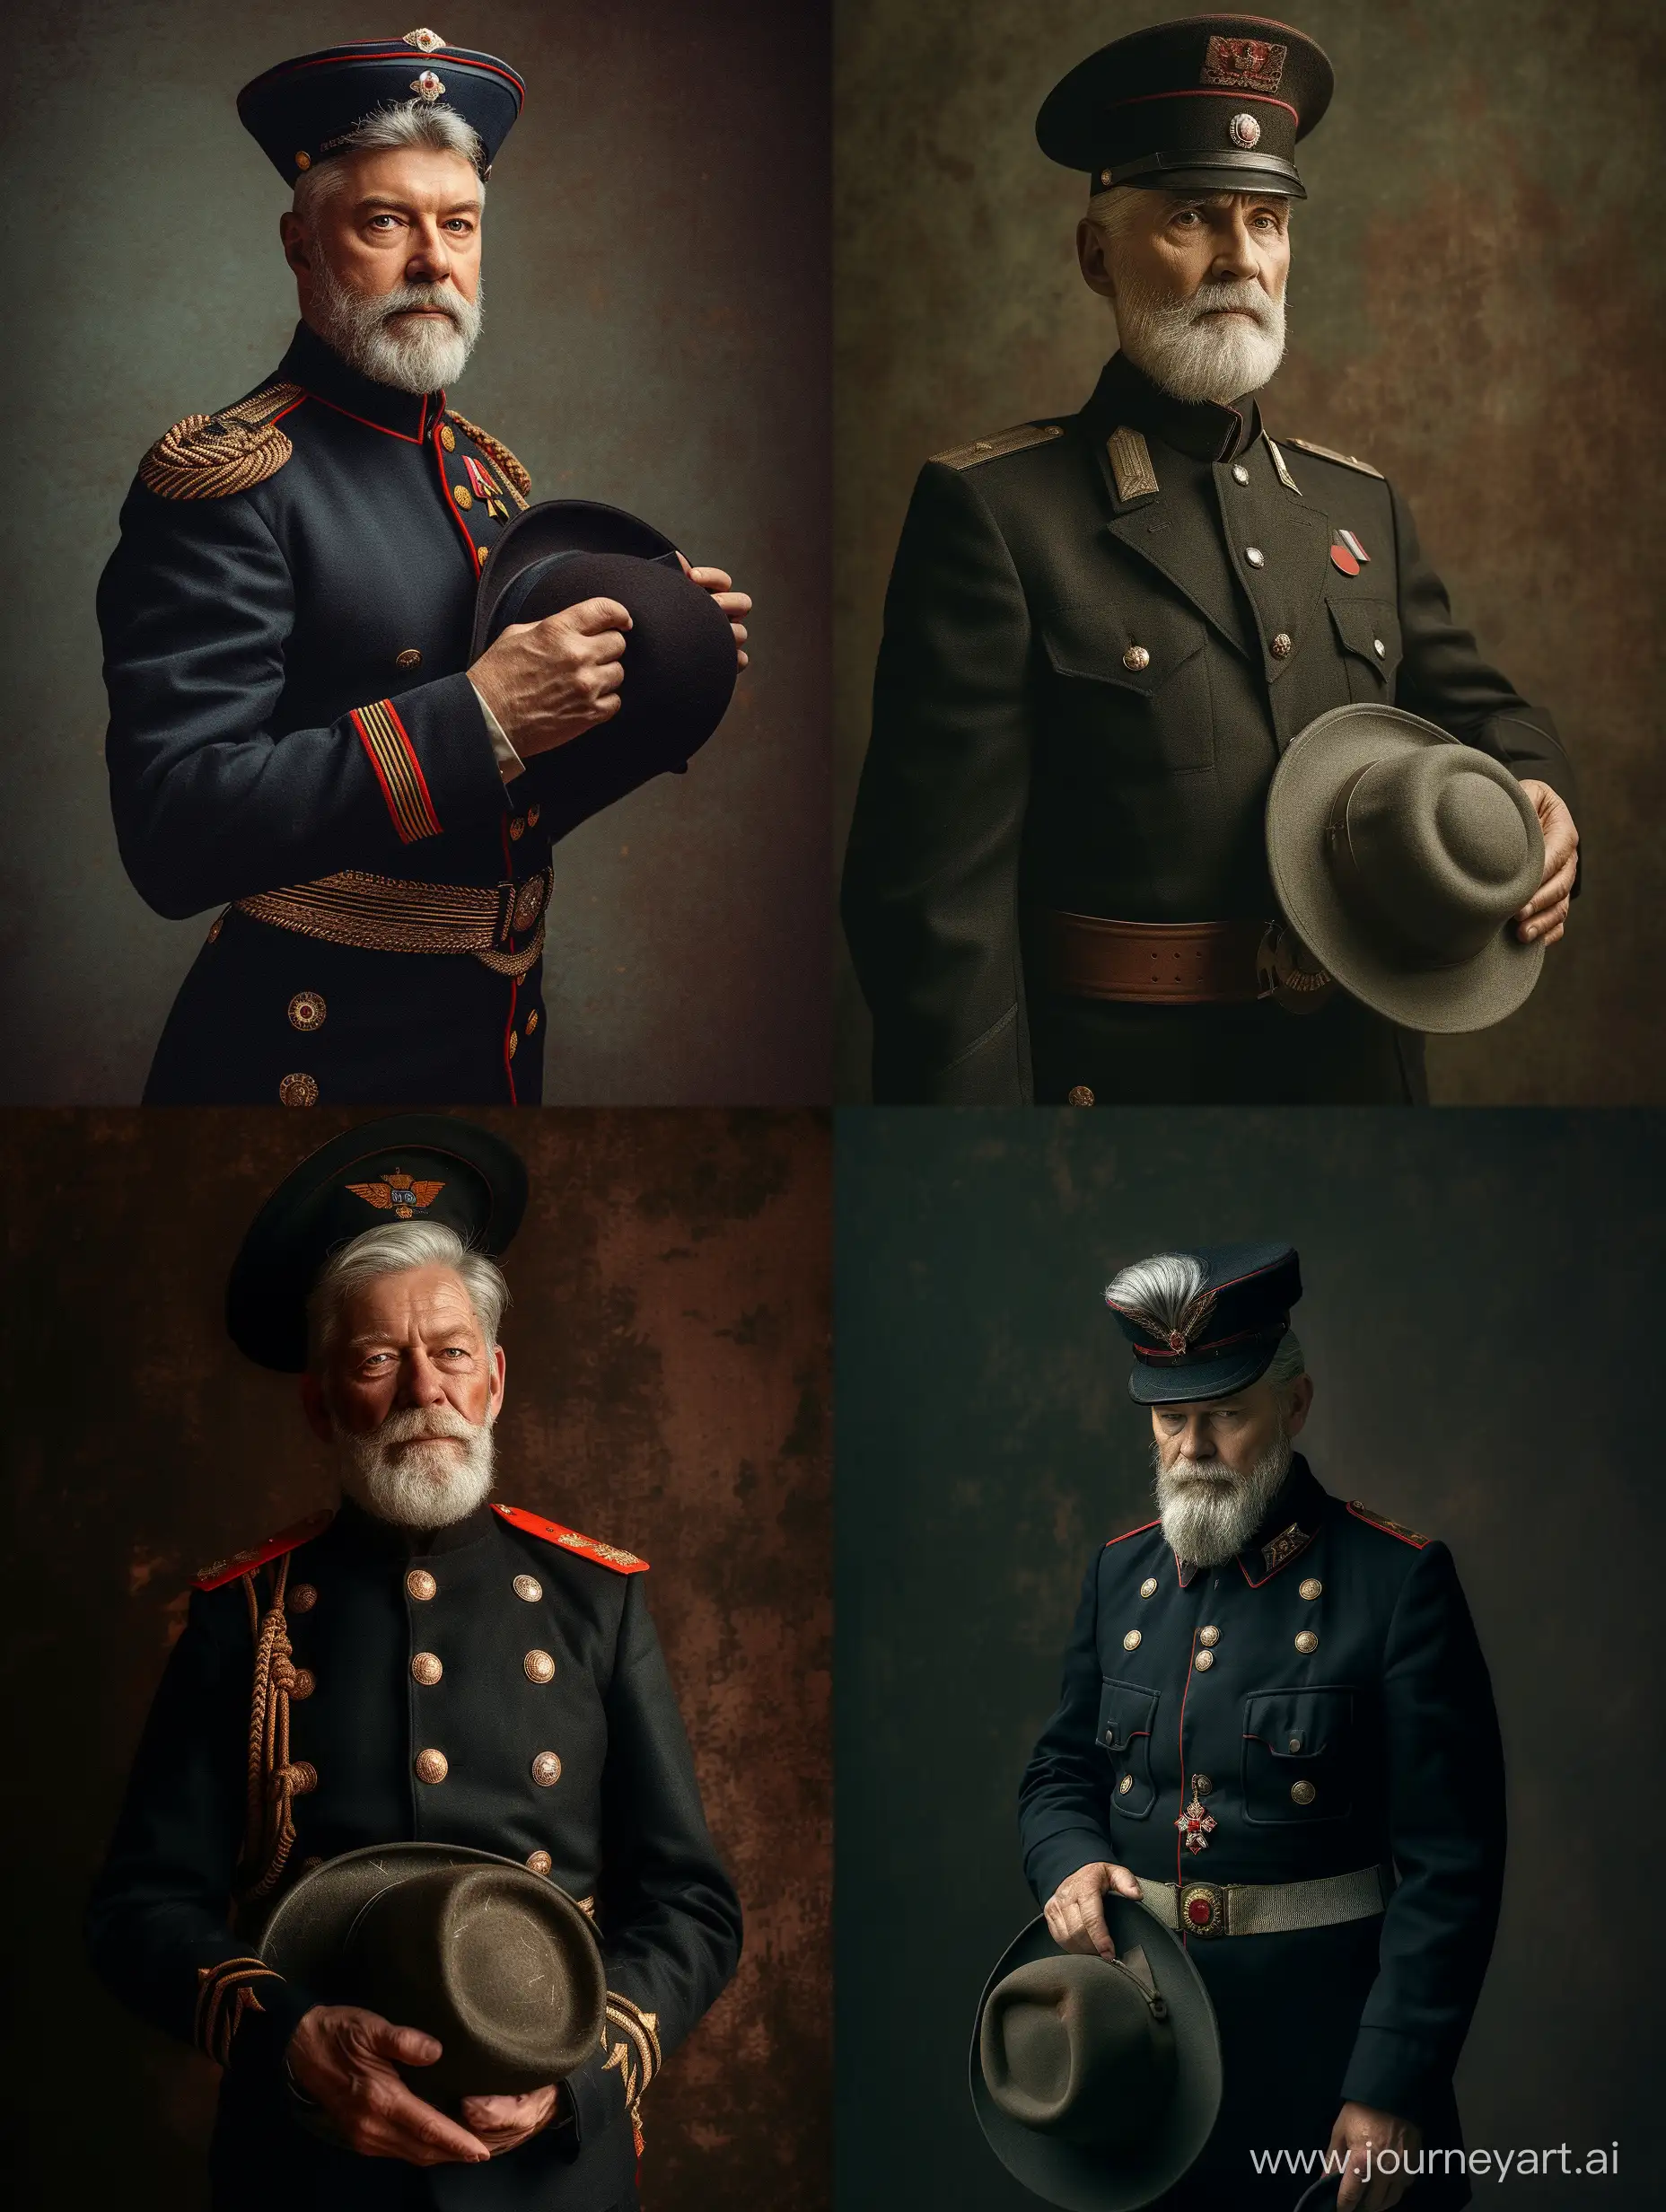 SilverHaired-Military-Man-in-1940s-Uniform